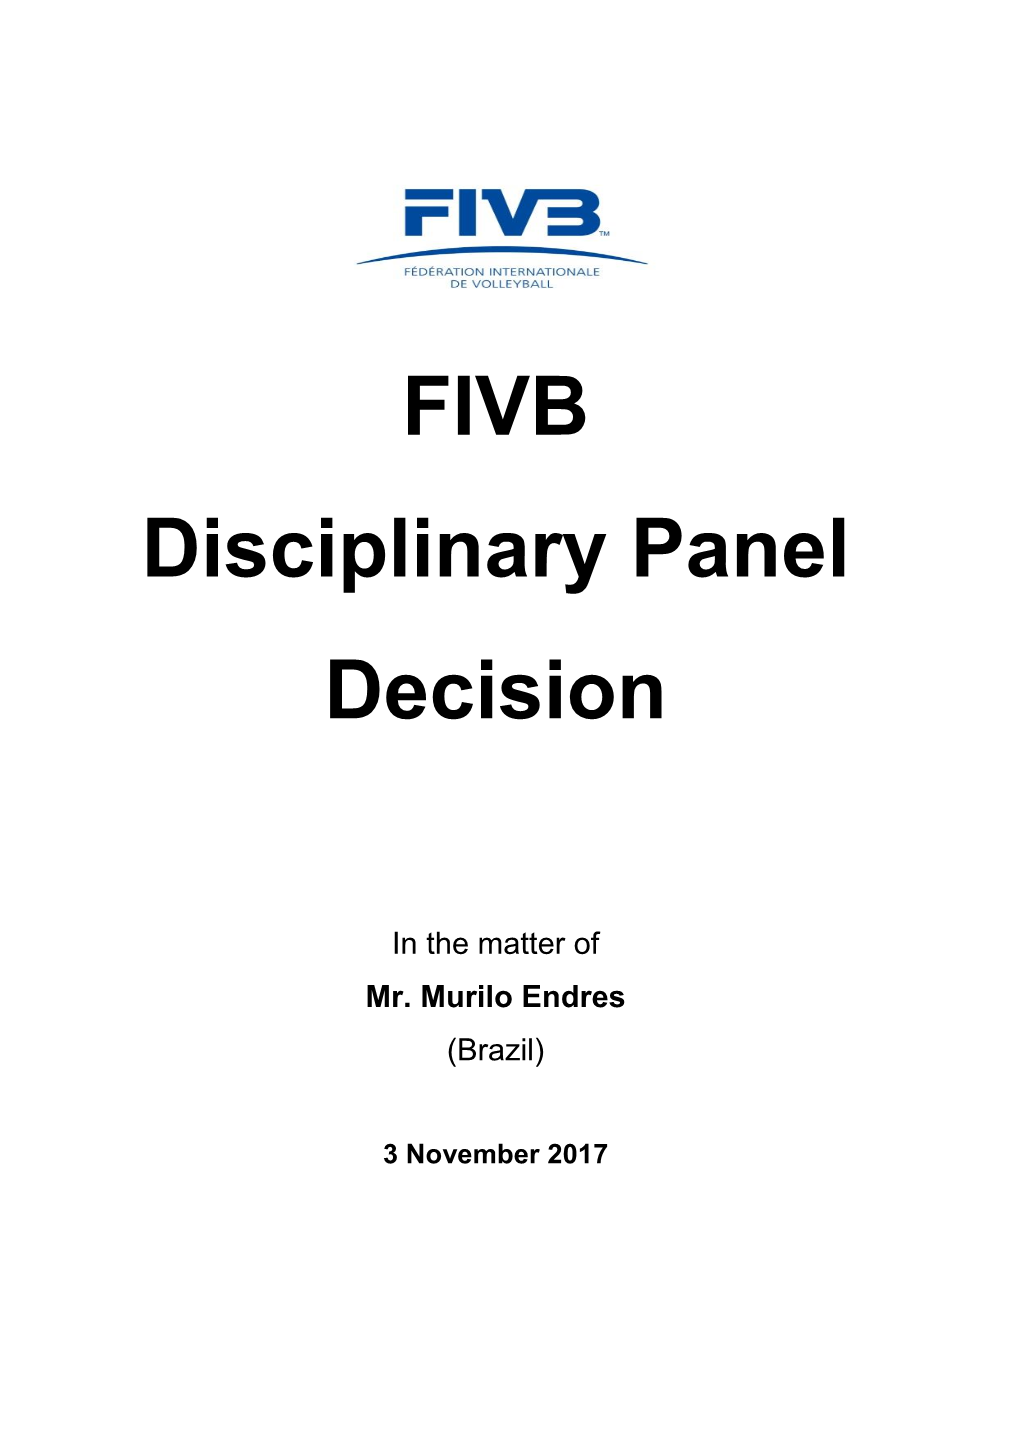 The Fivb Anti-Doping Hearing Panel